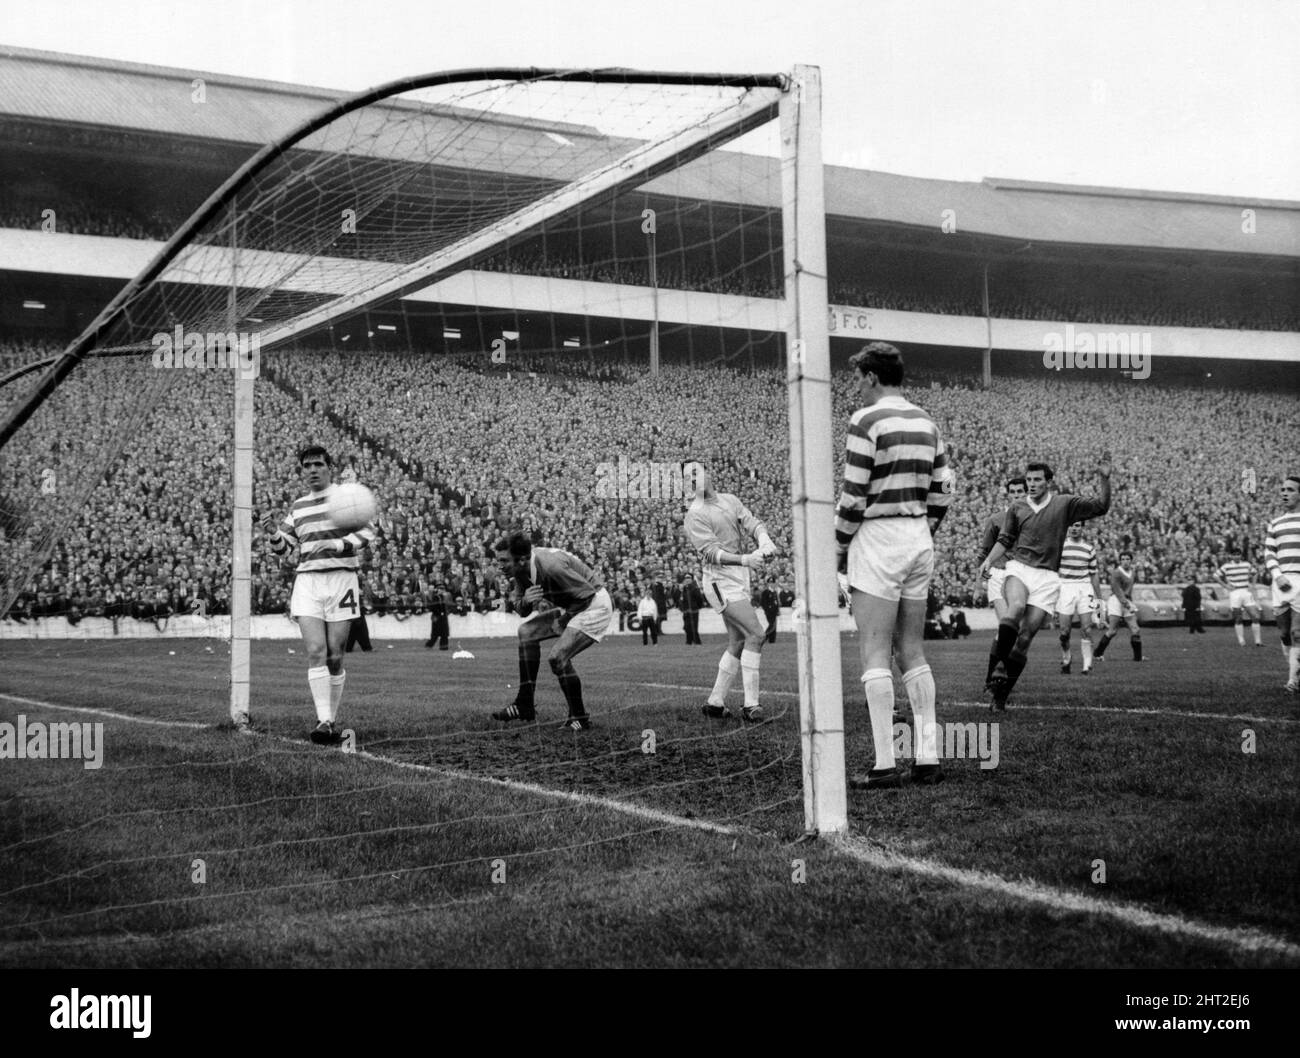 Celtic 1-0 Rangers, Scottish League Cup Final, Hampden Park, Glasgow, Scotland, Saturday 29th October 1966. The 'Goal' that wasn't. Rangers inside left Alex Smith ducks as Bobby Watson slams the ball past Ronnie Simpson into the Celtic net. But referee Tom ¿y¿harton chalks it off. Stock Photo